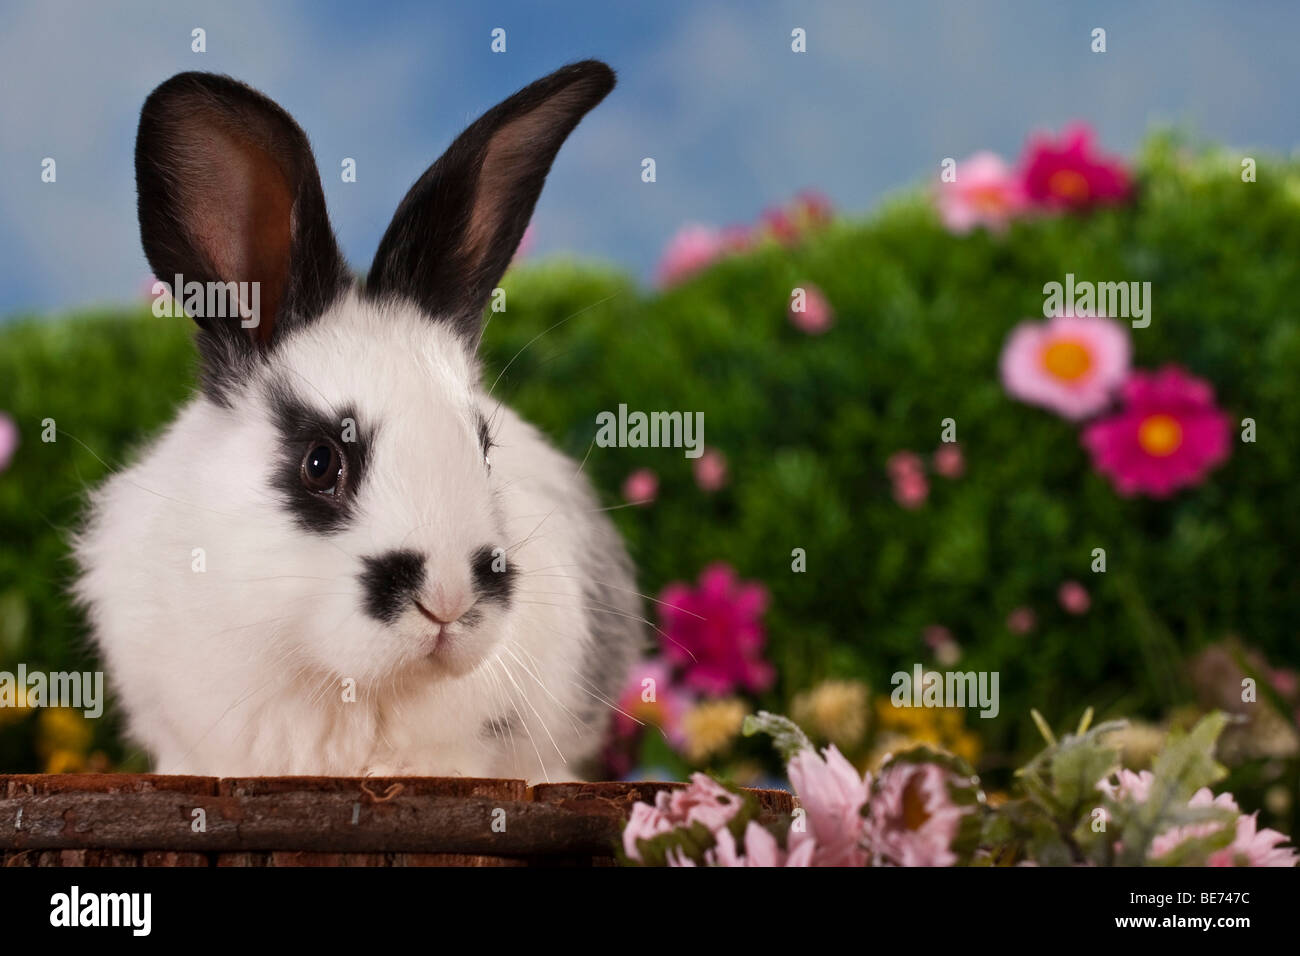 Black-white spotted rabbit, surrounded by flowers Stock Photo